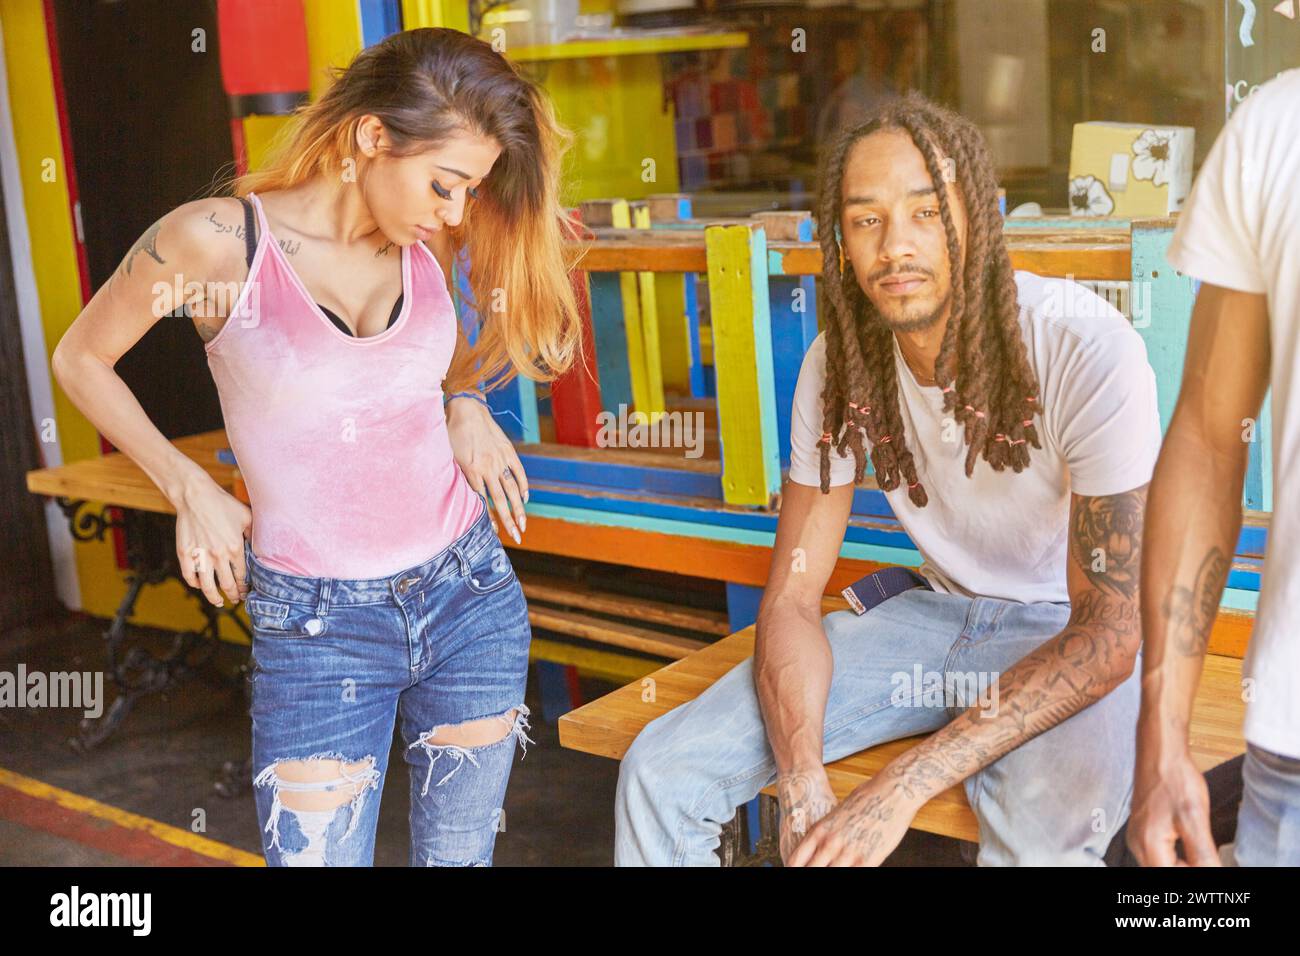 Two people in casual attire sitting outside a colorful establishment Stock Photo